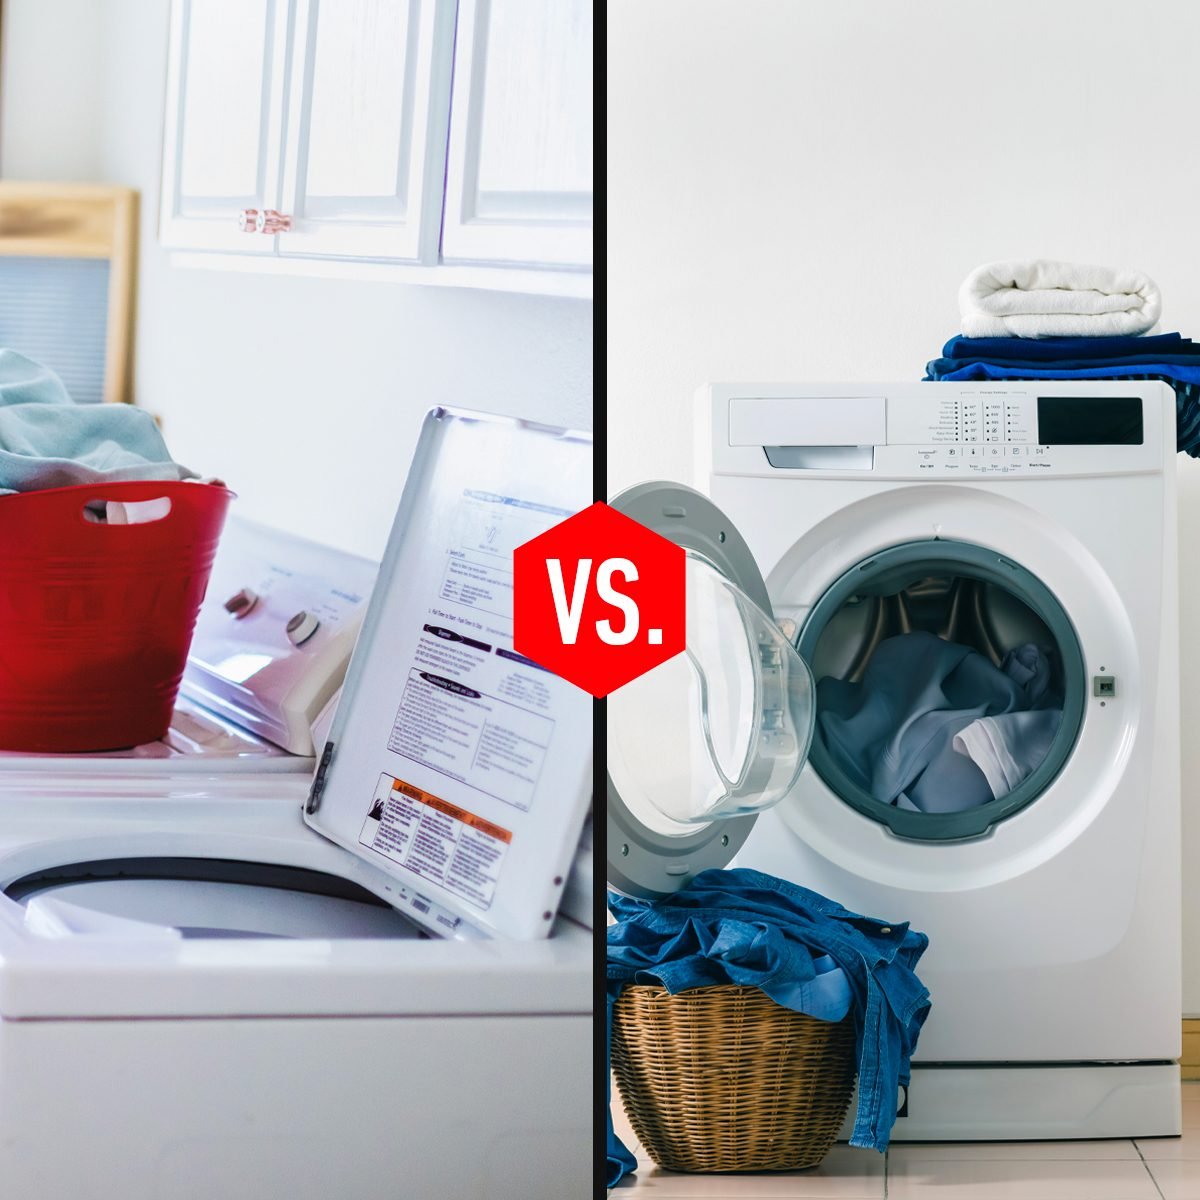 Explained: Difference between front-loading and top-loading washing machines  - Times of India